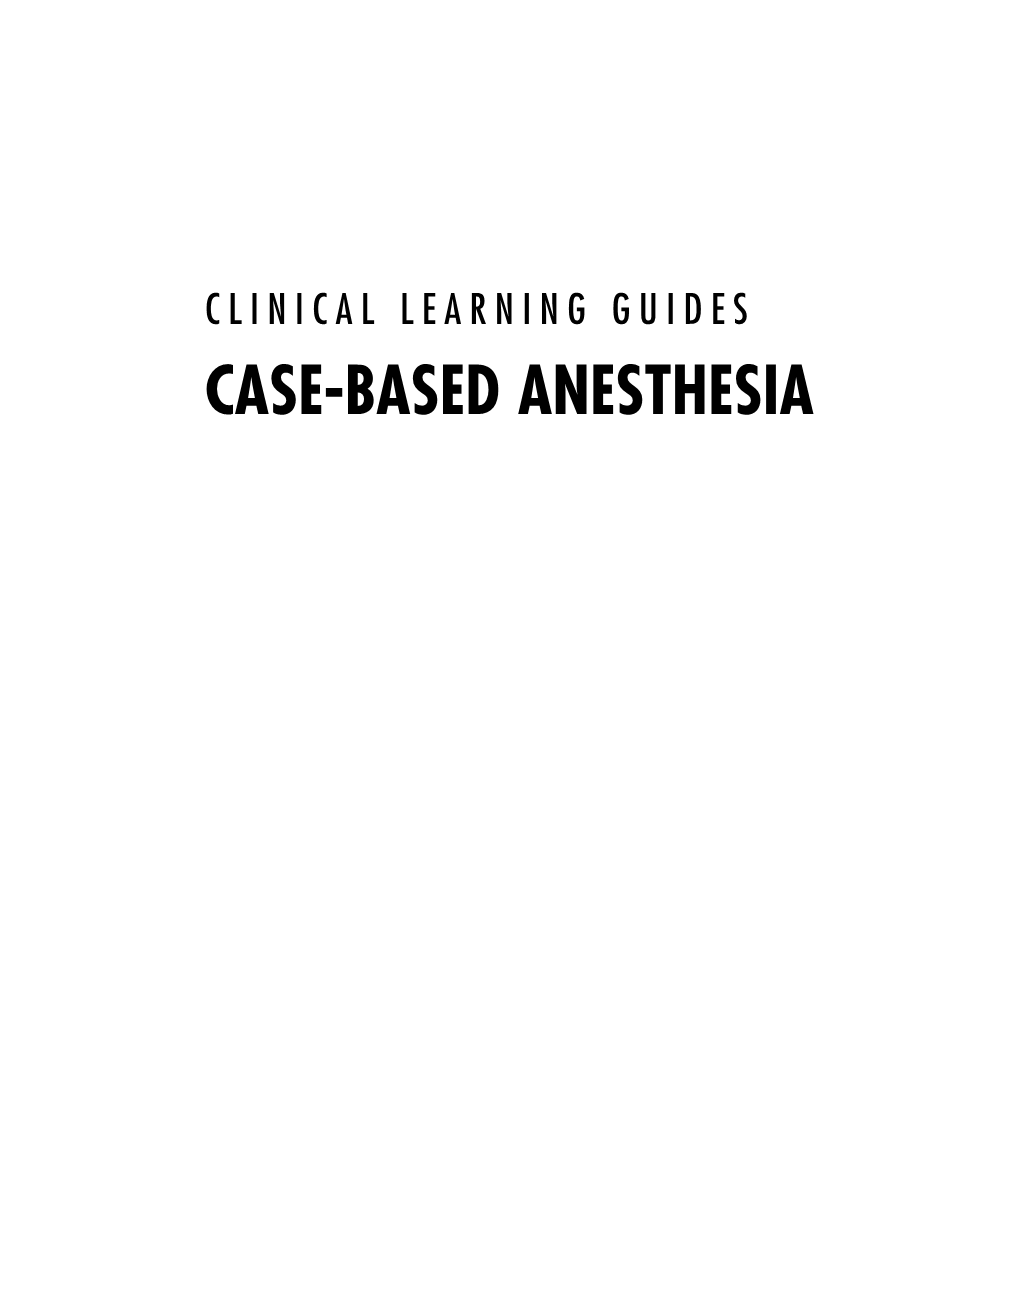 Case-Based Anesthesia : Clinical Learning Guides / [Edited By] George Shorten